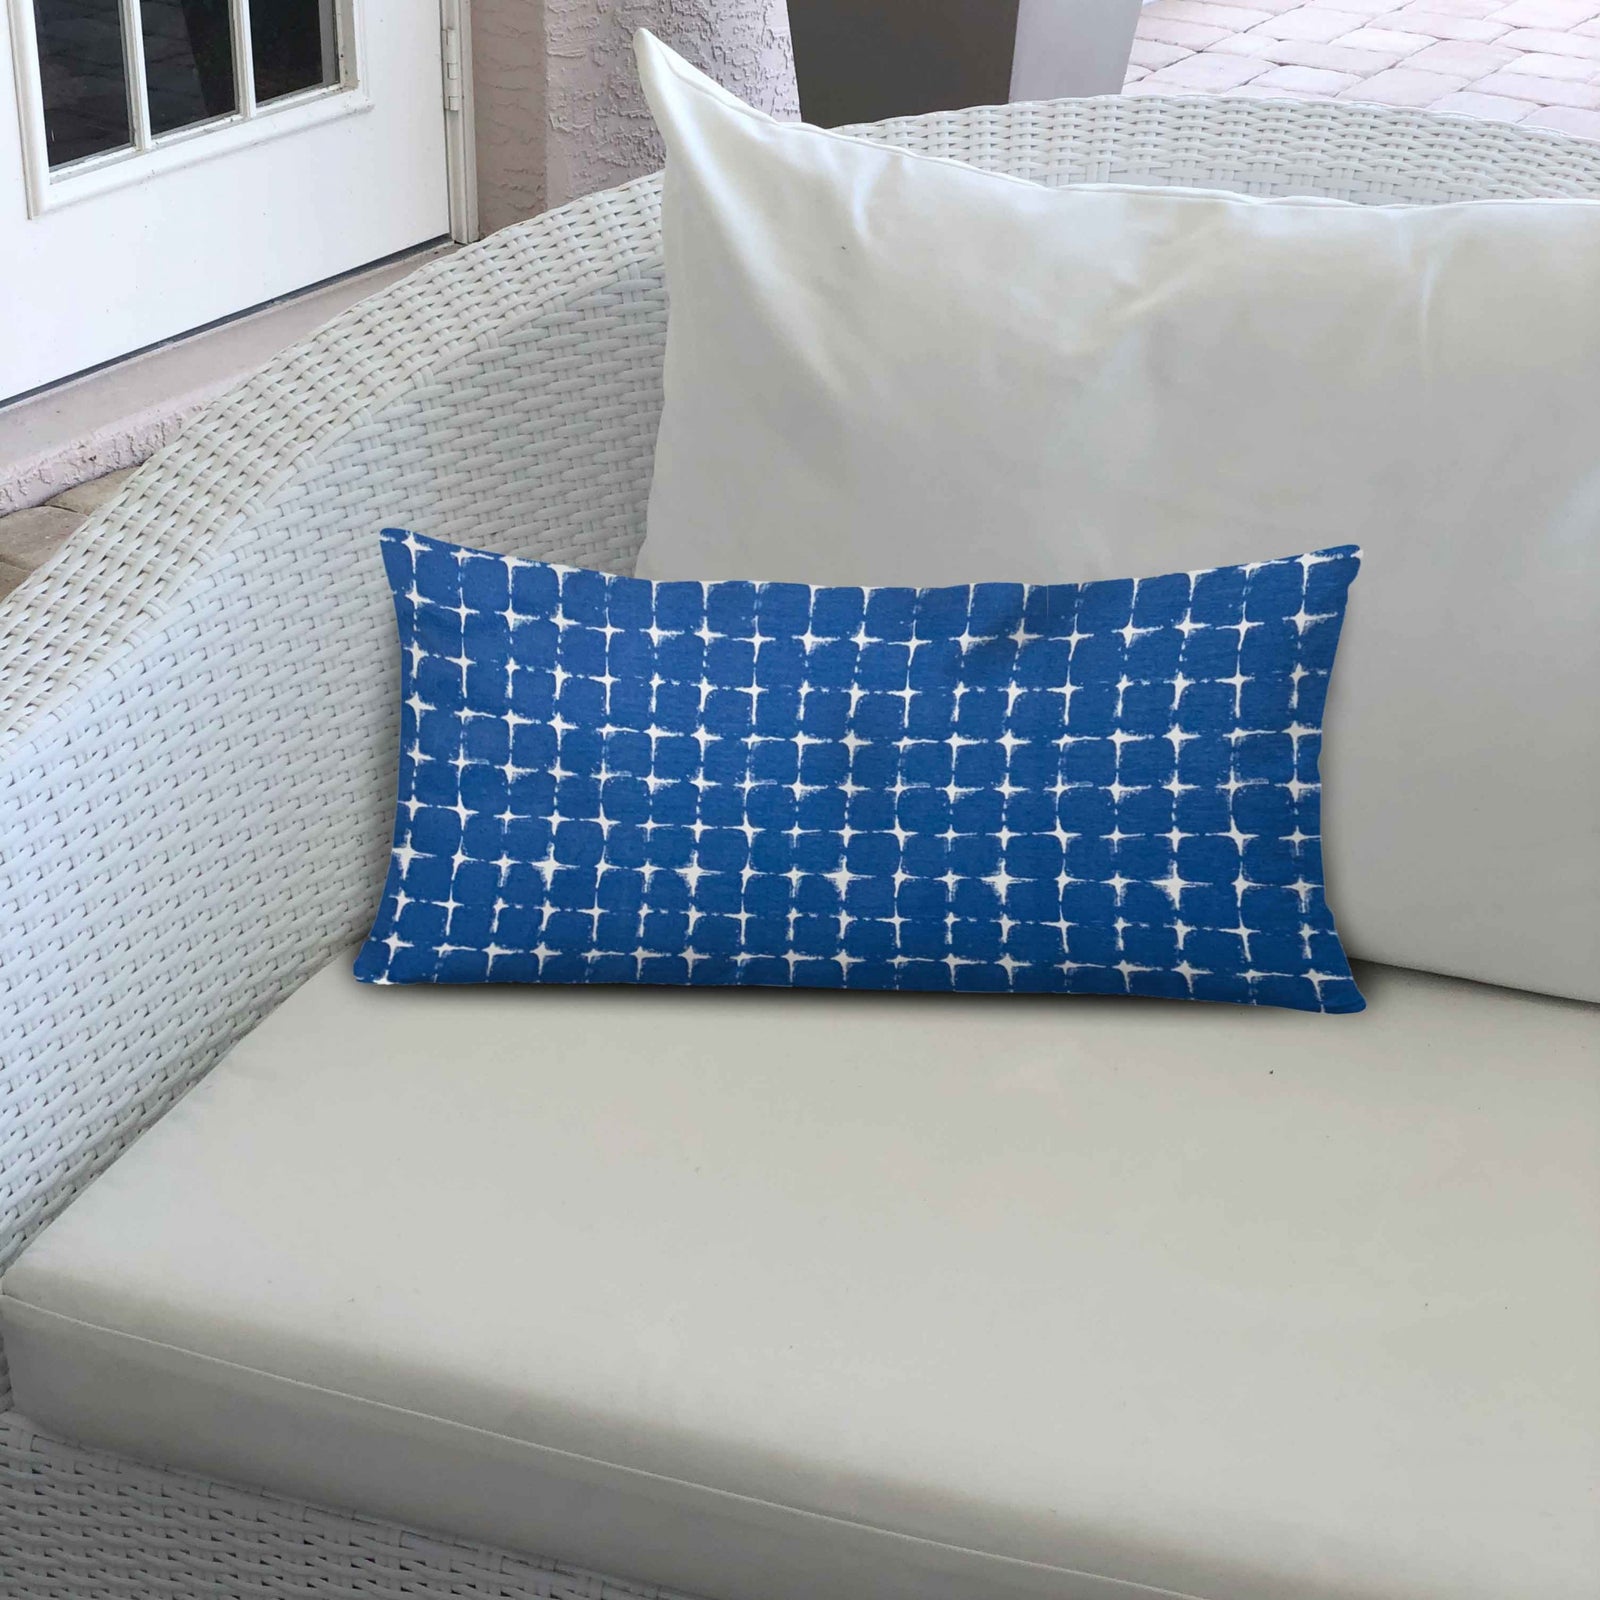 26" X 26" Blue And White Enveloped Gingham Throw Indoor Outdoor Pillow